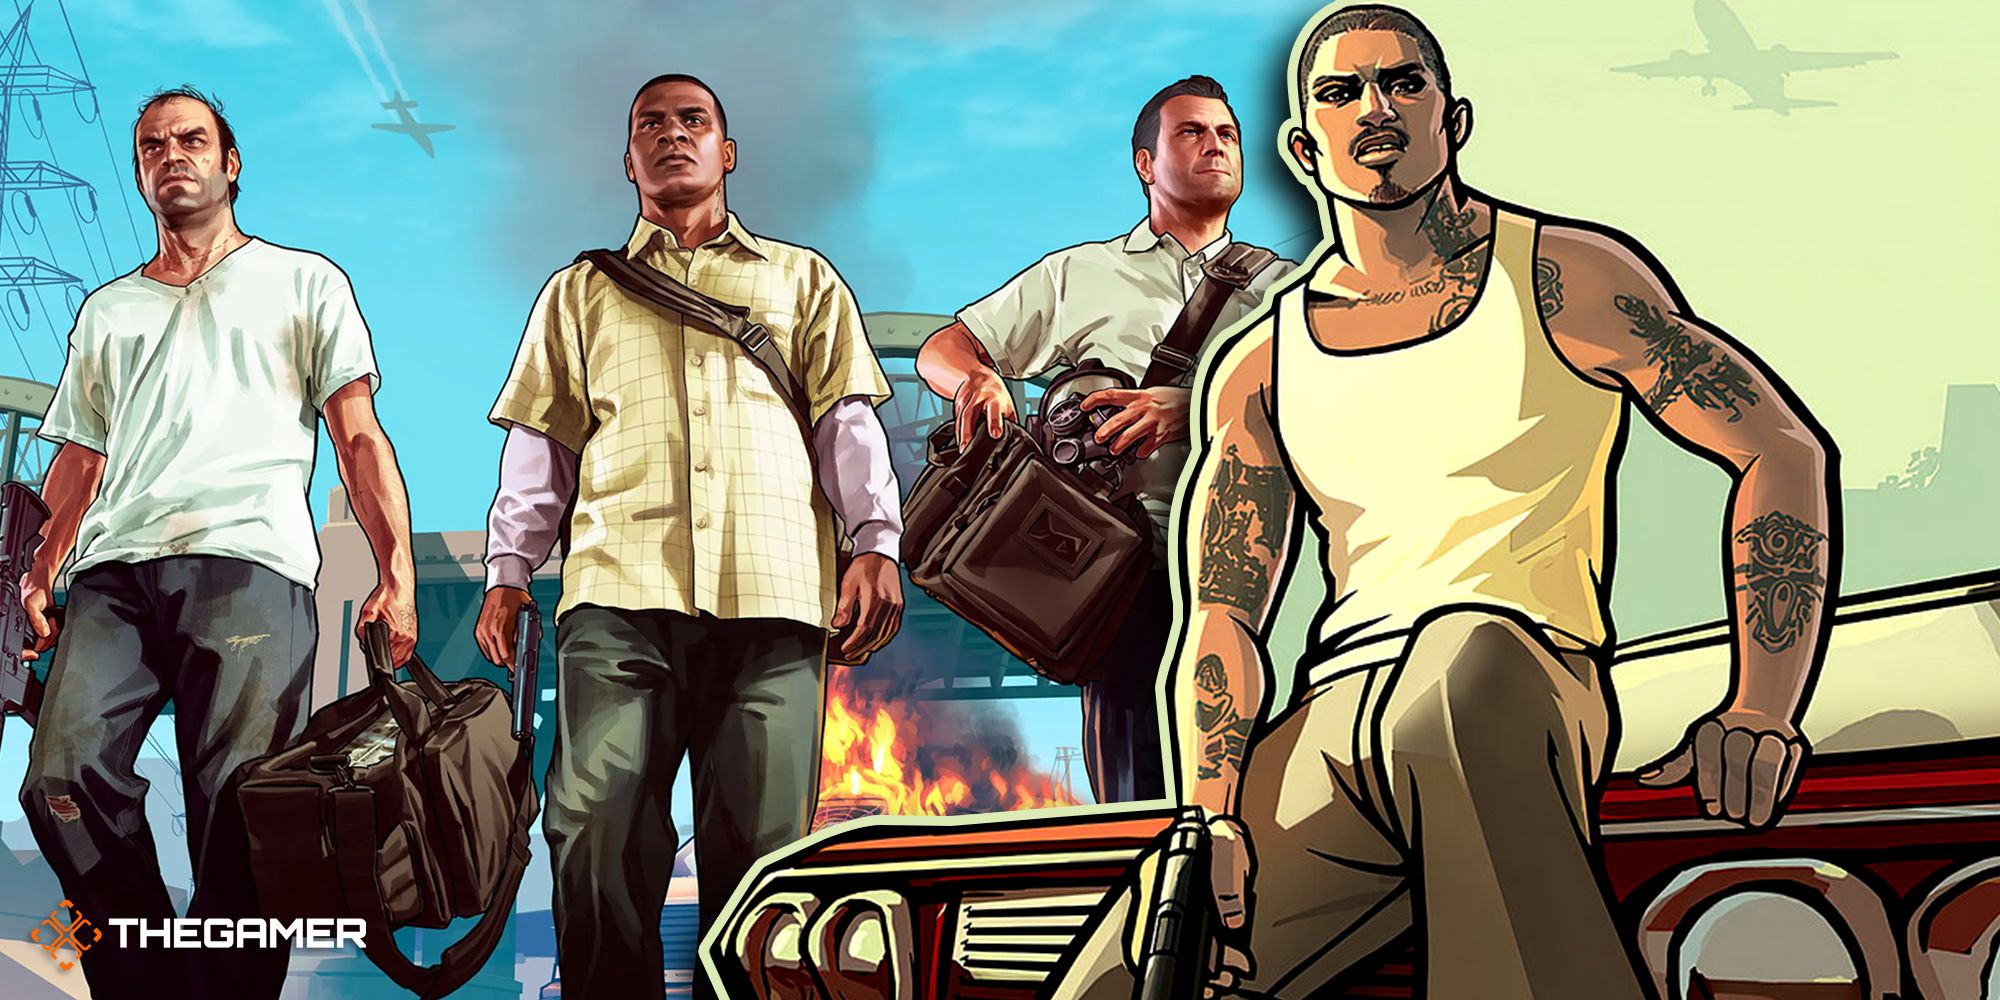 Game art from Grand Theft Auto 5 and San Andreas.